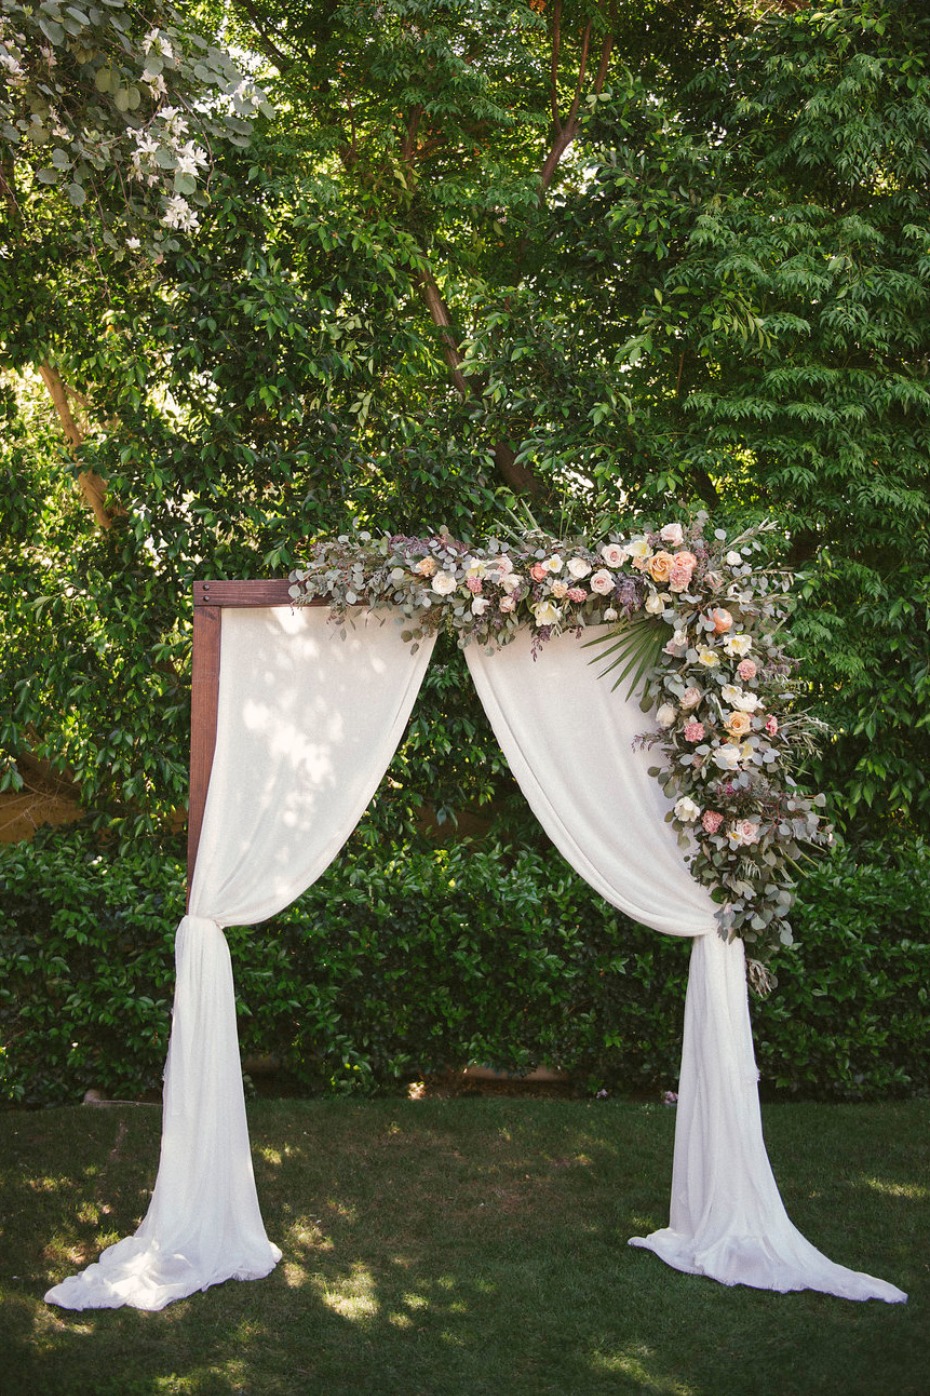 Picture perfect arch with draped fabric and garden florals